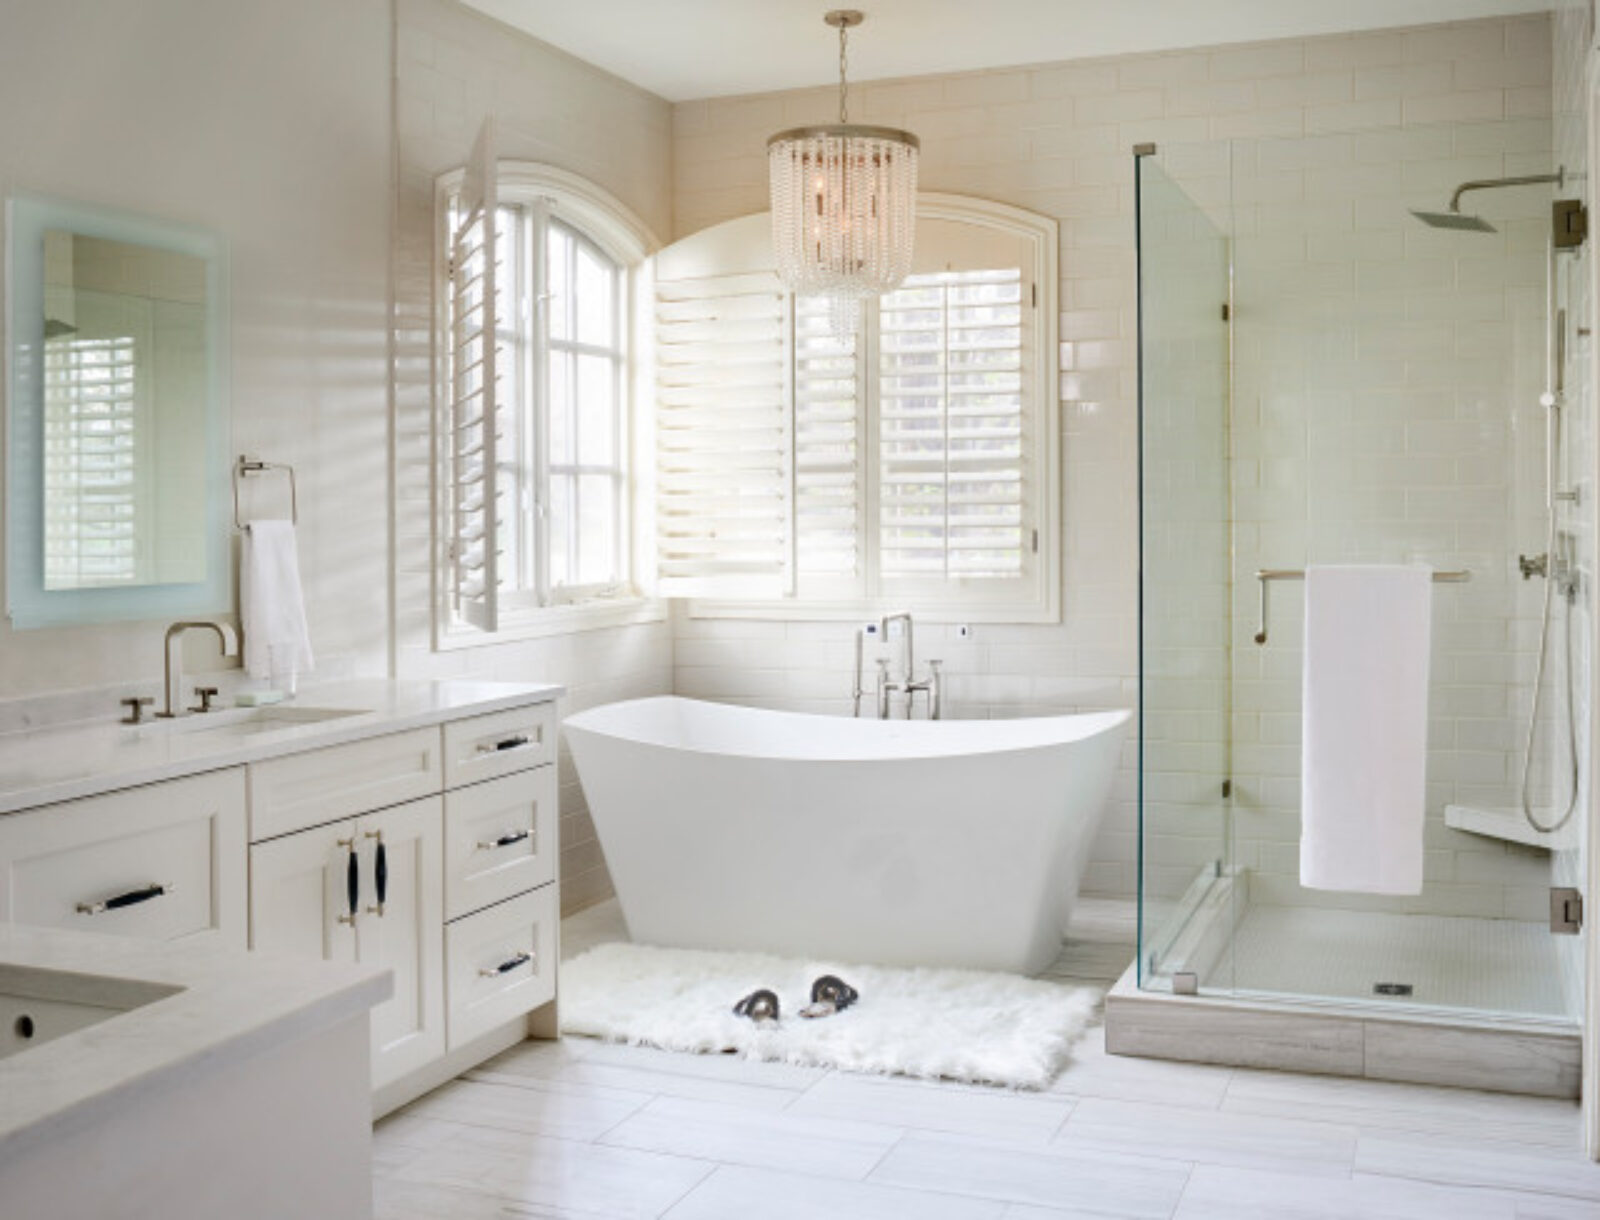 4 Checklist Items To Consider Before Starting Your Bathroom Renovation ...